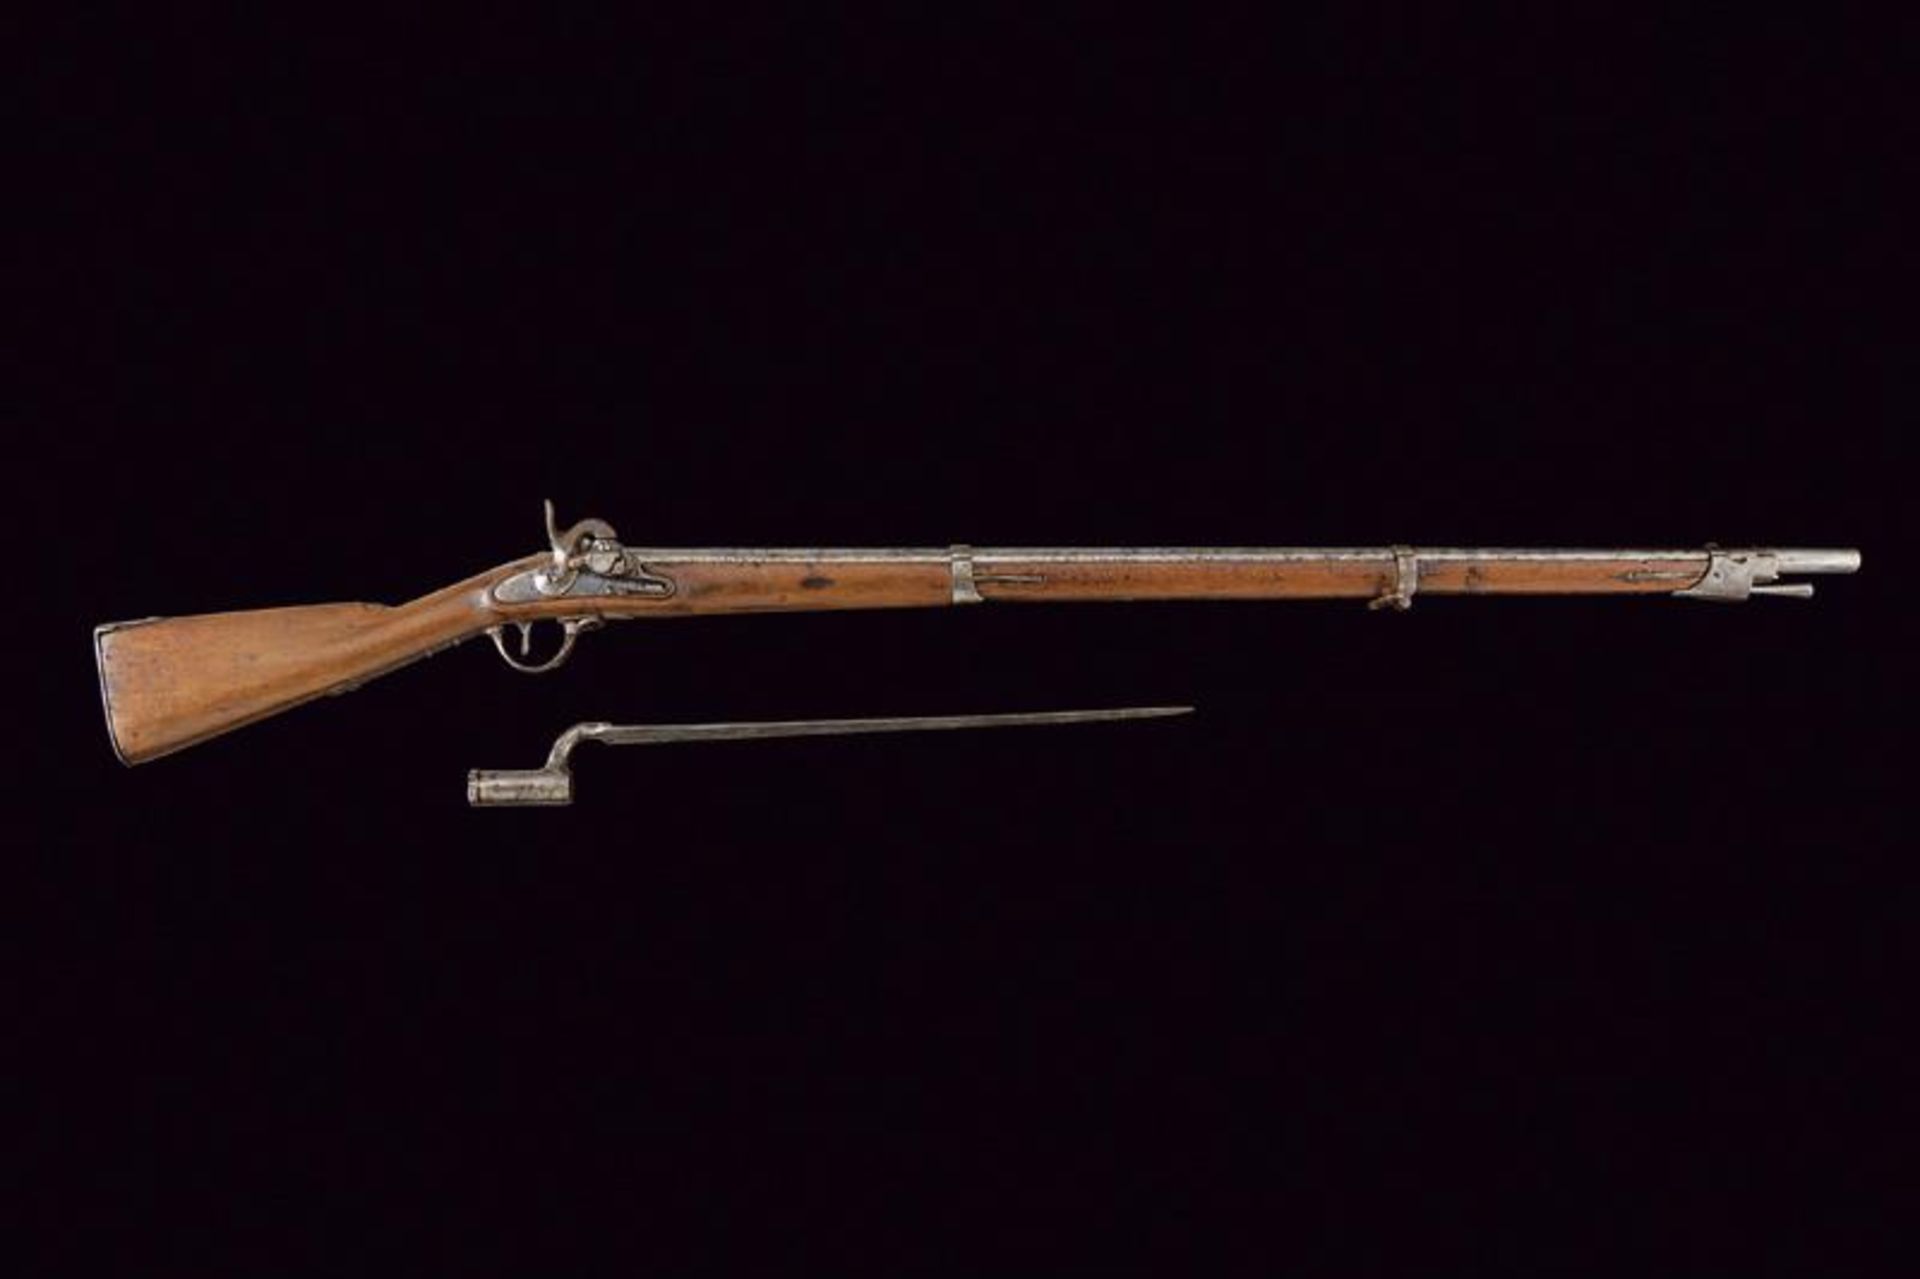 An infantry 1842 model Augustin musket with bayonet - Bild 8 aus 8